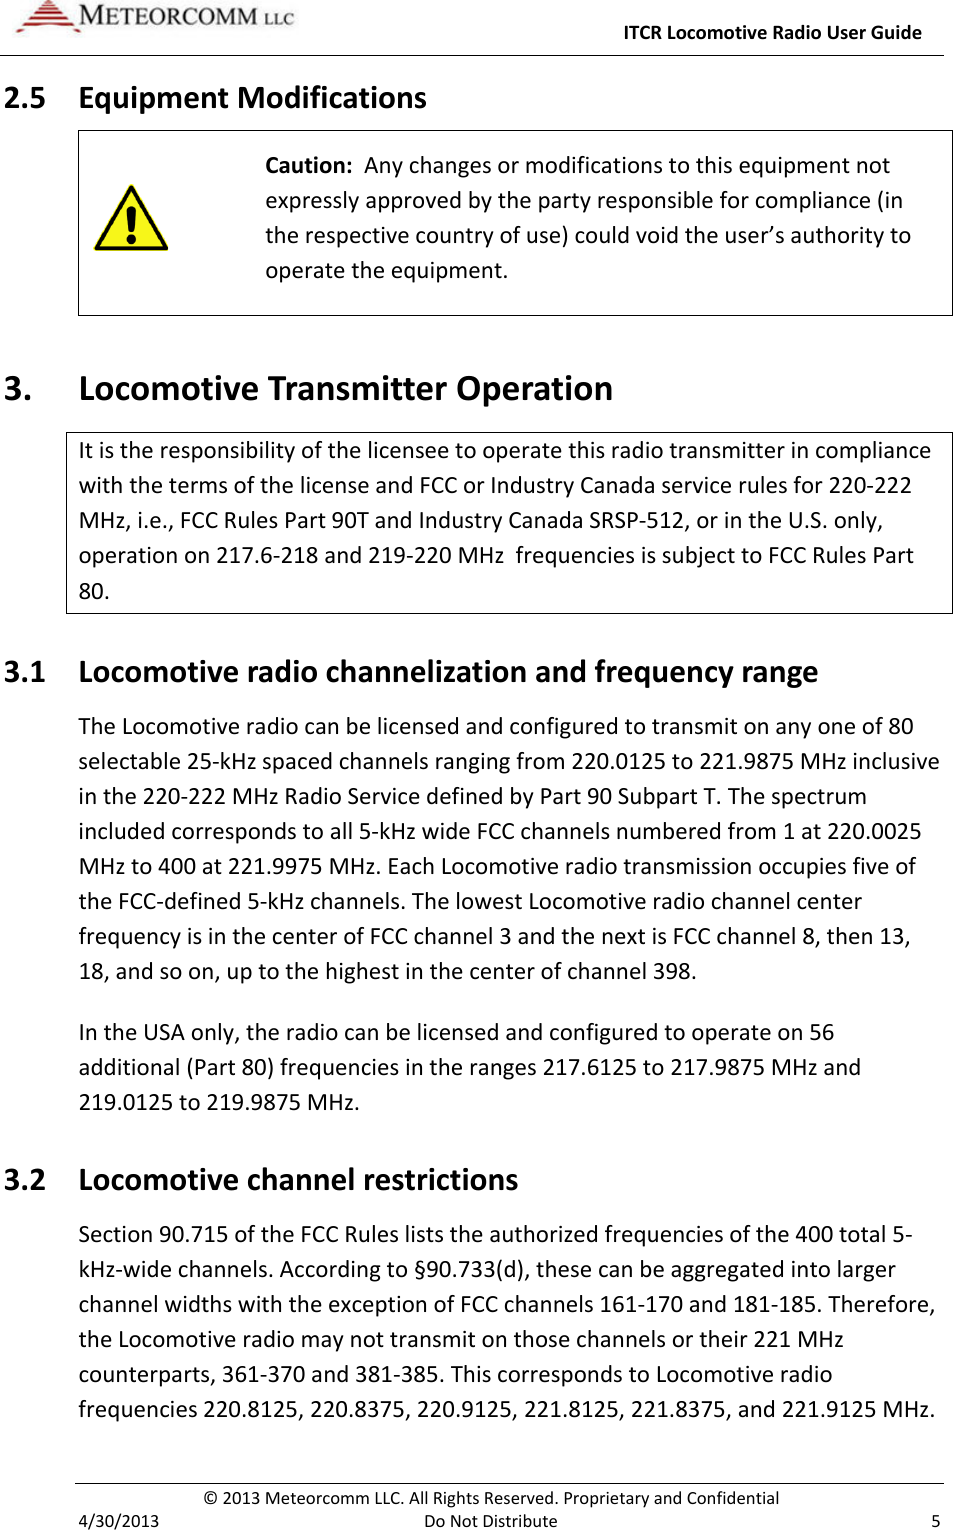     ITCR Locomotive Radio User Guide  © 2013 Meteorcomm LLC. All Rights Reserved. Proprietary and Confidential   4/30/2013  Do Not Distribute  5 2.5 Equipment Modifications   Caution:  Any changes or modifications to this equipment not expressly approved by the party responsible for compliance (in the respective country of use) could void the user’s authority to operate the equipment. 3. Locomotive Transmitter Operation It is the responsibility of the licensee to operate this radio transmitter in compliance with the terms of the license and FCC or Industry Canada service rules for 220-222 MHz, i.e., FCC Rules Part 90T and Industry Canada SRSP-512, or in the U.S. only, operation on 217.6-218 and 219-220 MHz  frequencies is subject to FCC Rules Part 80. 3.1 Locomotive radio channelization and frequency range The Locomotive radio can be licensed and configured to transmit on any one of 80 selectable 25-kHz spaced channels ranging from 220.0125 to 221.9875 MHz inclusive in the 220-222 MHz Radio Service defined by Part 90 Subpart T. The spectrum included corresponds to all 5-kHz wide FCC channels numbered from 1 at 220.0025 MHz to 400 at 221.9975 MHz. Each Locomotive radio transmission occupies five of the FCC-defined 5-kHz channels. The lowest Locomotive radio channel center frequency is in the center of FCC channel 3 and the next is FCC channel 8, then 13, 18, and so on, up to the highest in the center of channel 398. In the USA only, the radio can be licensed and configured to operate on 56 additional (Part 80) frequencies in the ranges 217.6125 to 217.9875 MHz and 219.0125 to 219.9875 MHz.  3.2 Locomotive channel restrictions Section 90.715 of the FCC Rules lists the authorized frequencies of the 400 total 5-kHz-wide channels. According to §90.733(d), these can be aggregated into larger channel widths with the exception of FCC channels 161-170 and 181-185. Therefore, the Locomotive radio may not transmit on those channels or their 221 MHz counterparts, 361-370 and 381-385. This corresponds to Locomotive radio frequencies 220.8125, 220.8375, 220.9125, 221.8125, 221.8375, and 221.9125 MHz. 